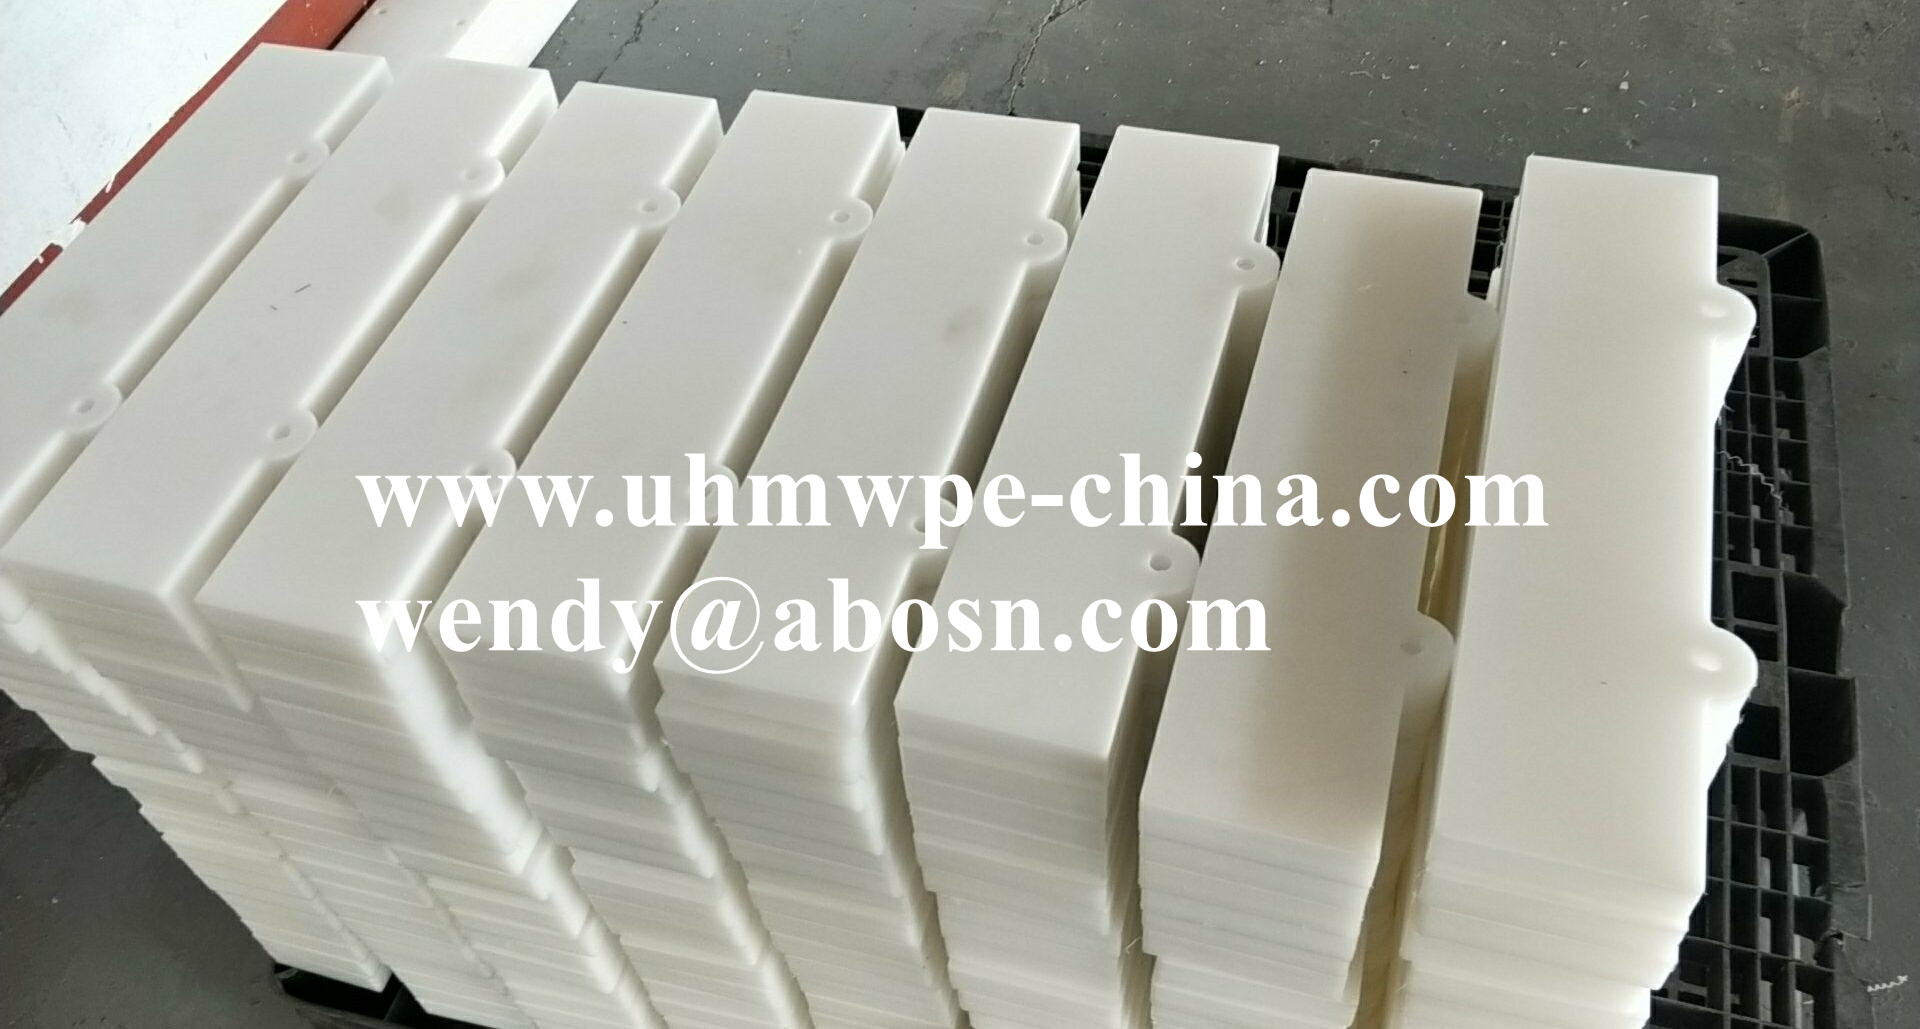 UHMWPE Block | Chain Guide | Roller